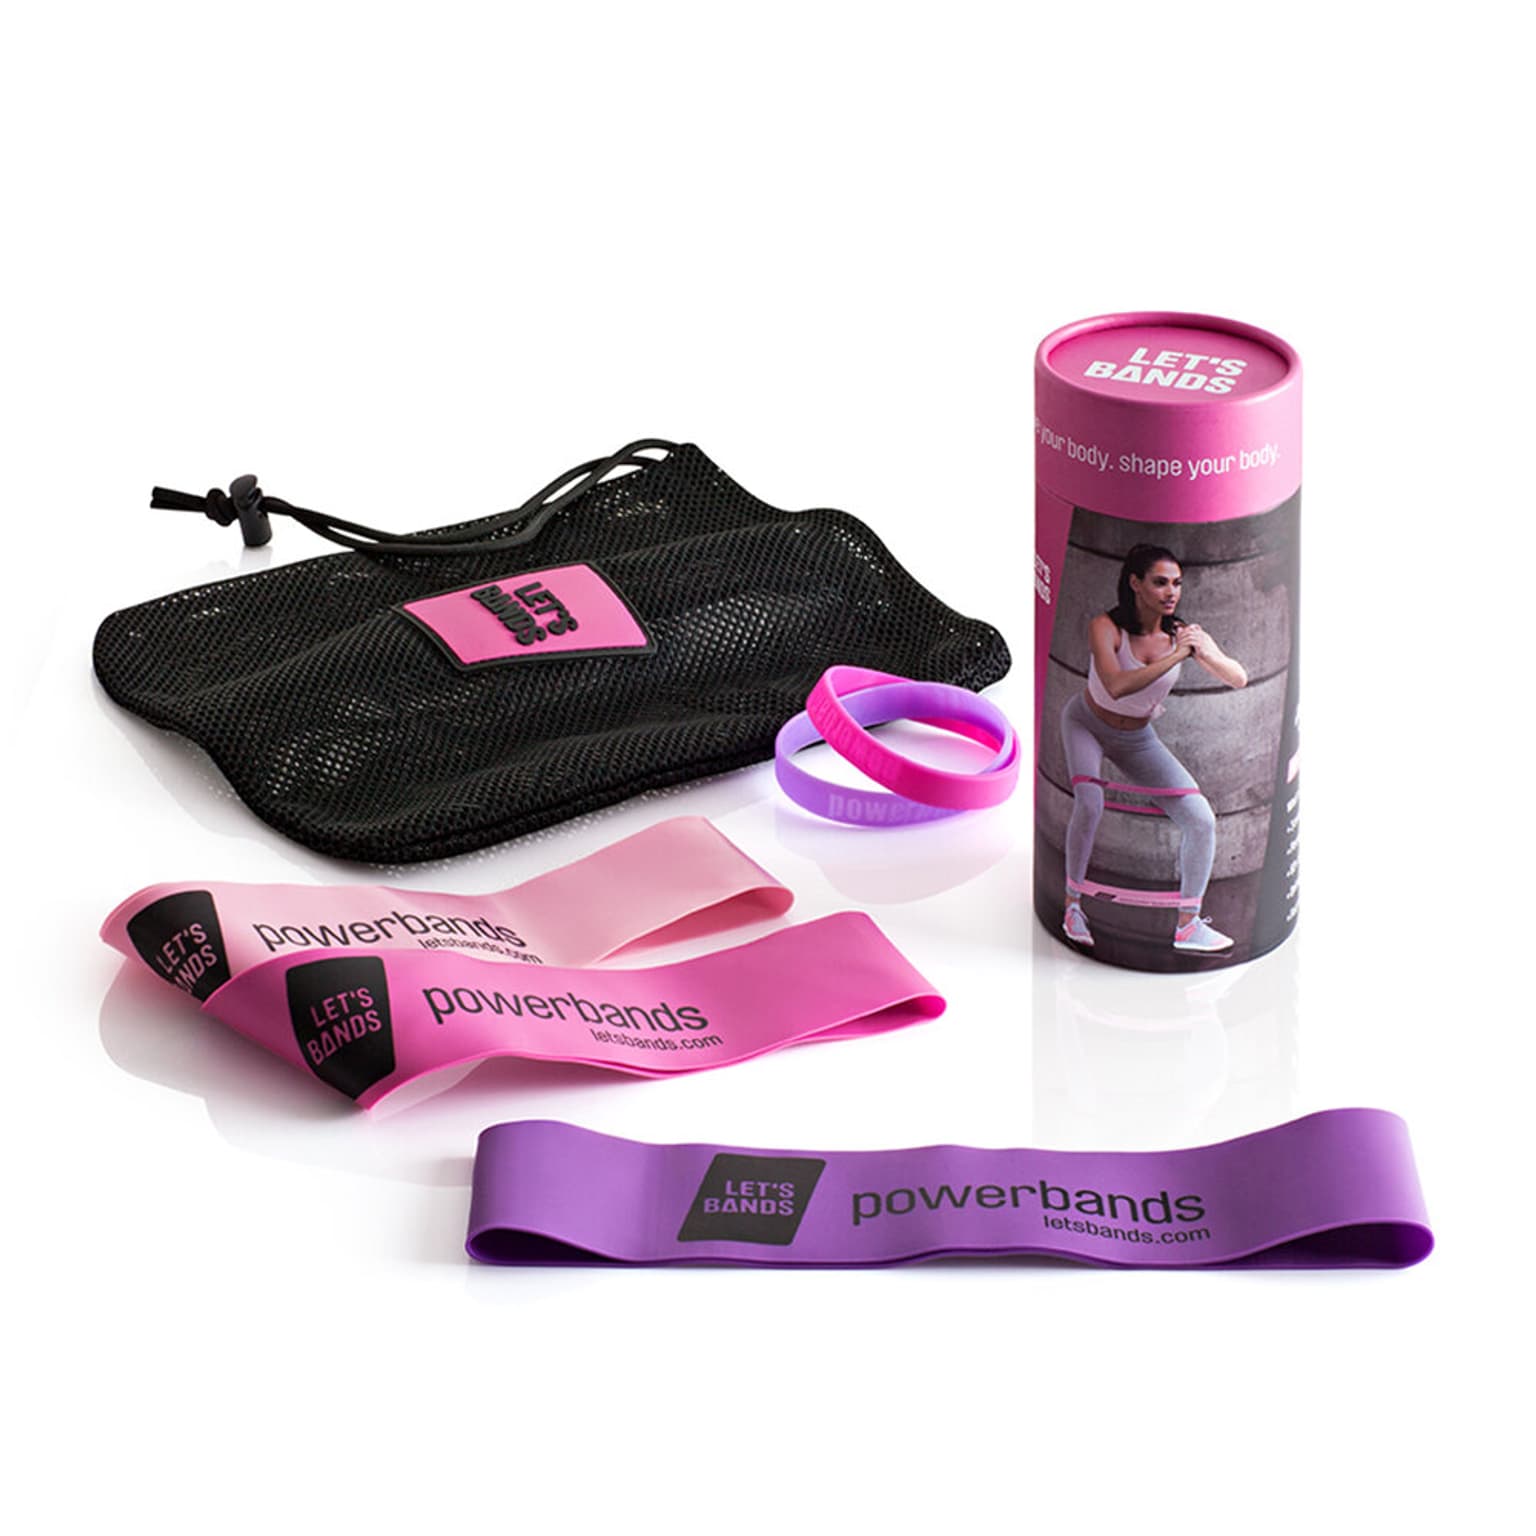 Let's Bands Let's Bands Powerbands Set Lady Elastico fitness 1